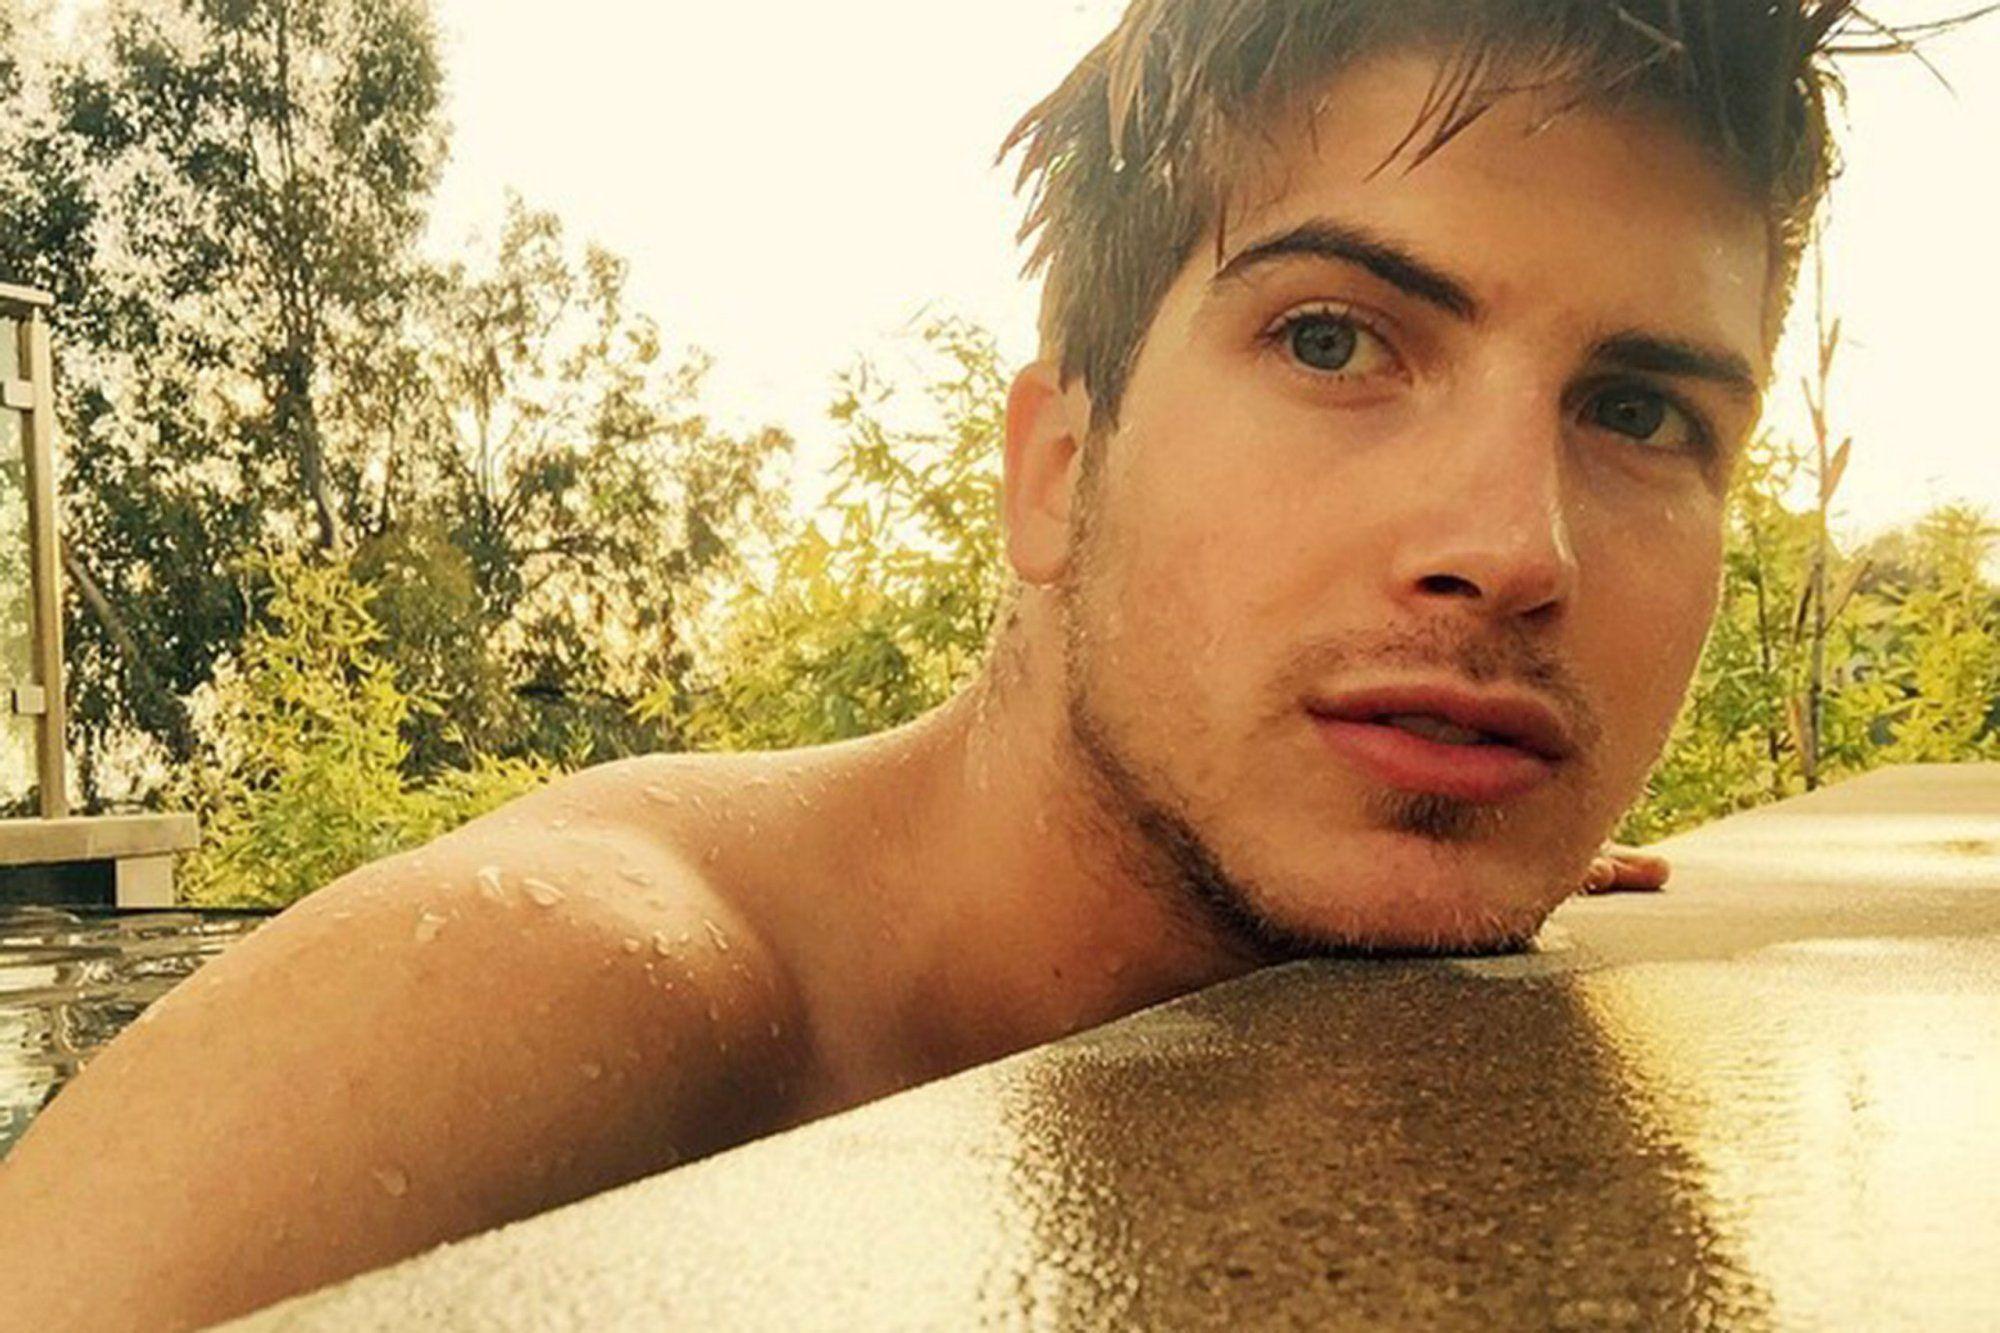 Joey Graceffa Wallpaper Image Photo Picture Background